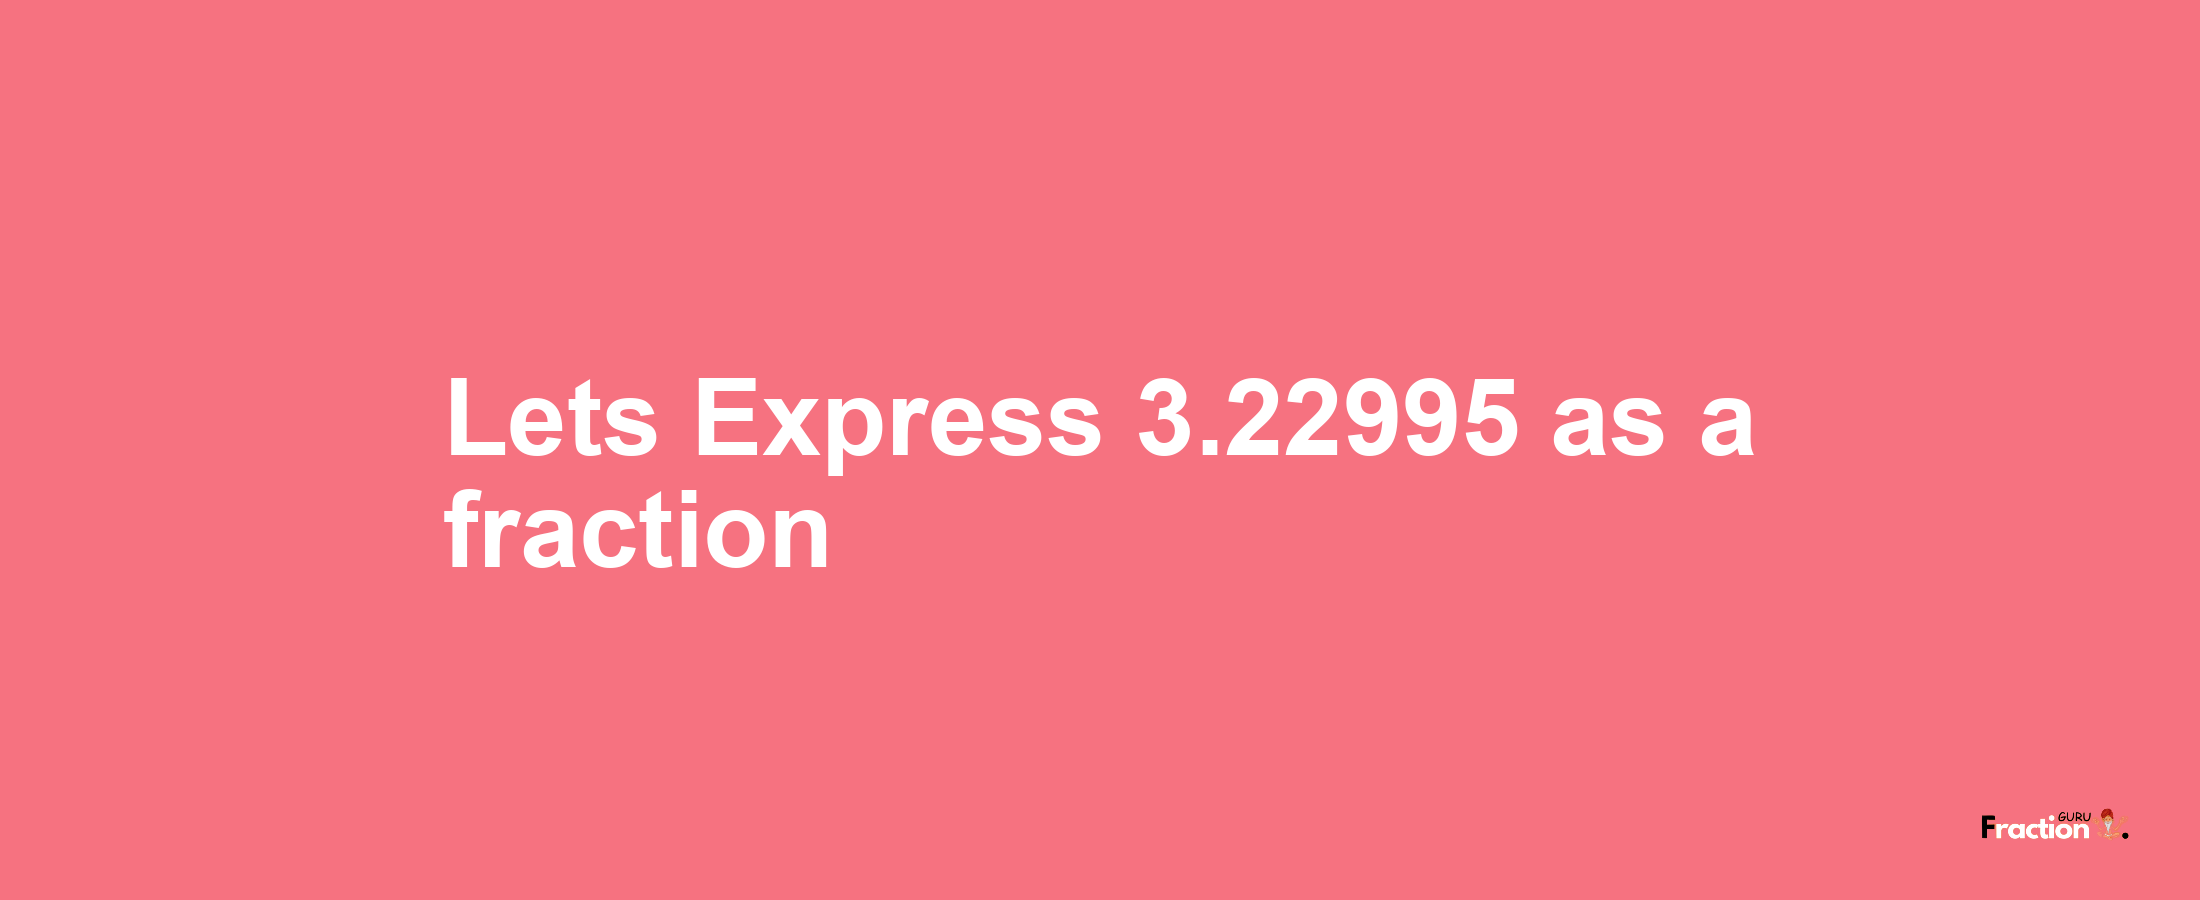 Lets Express 3.22995 as afraction